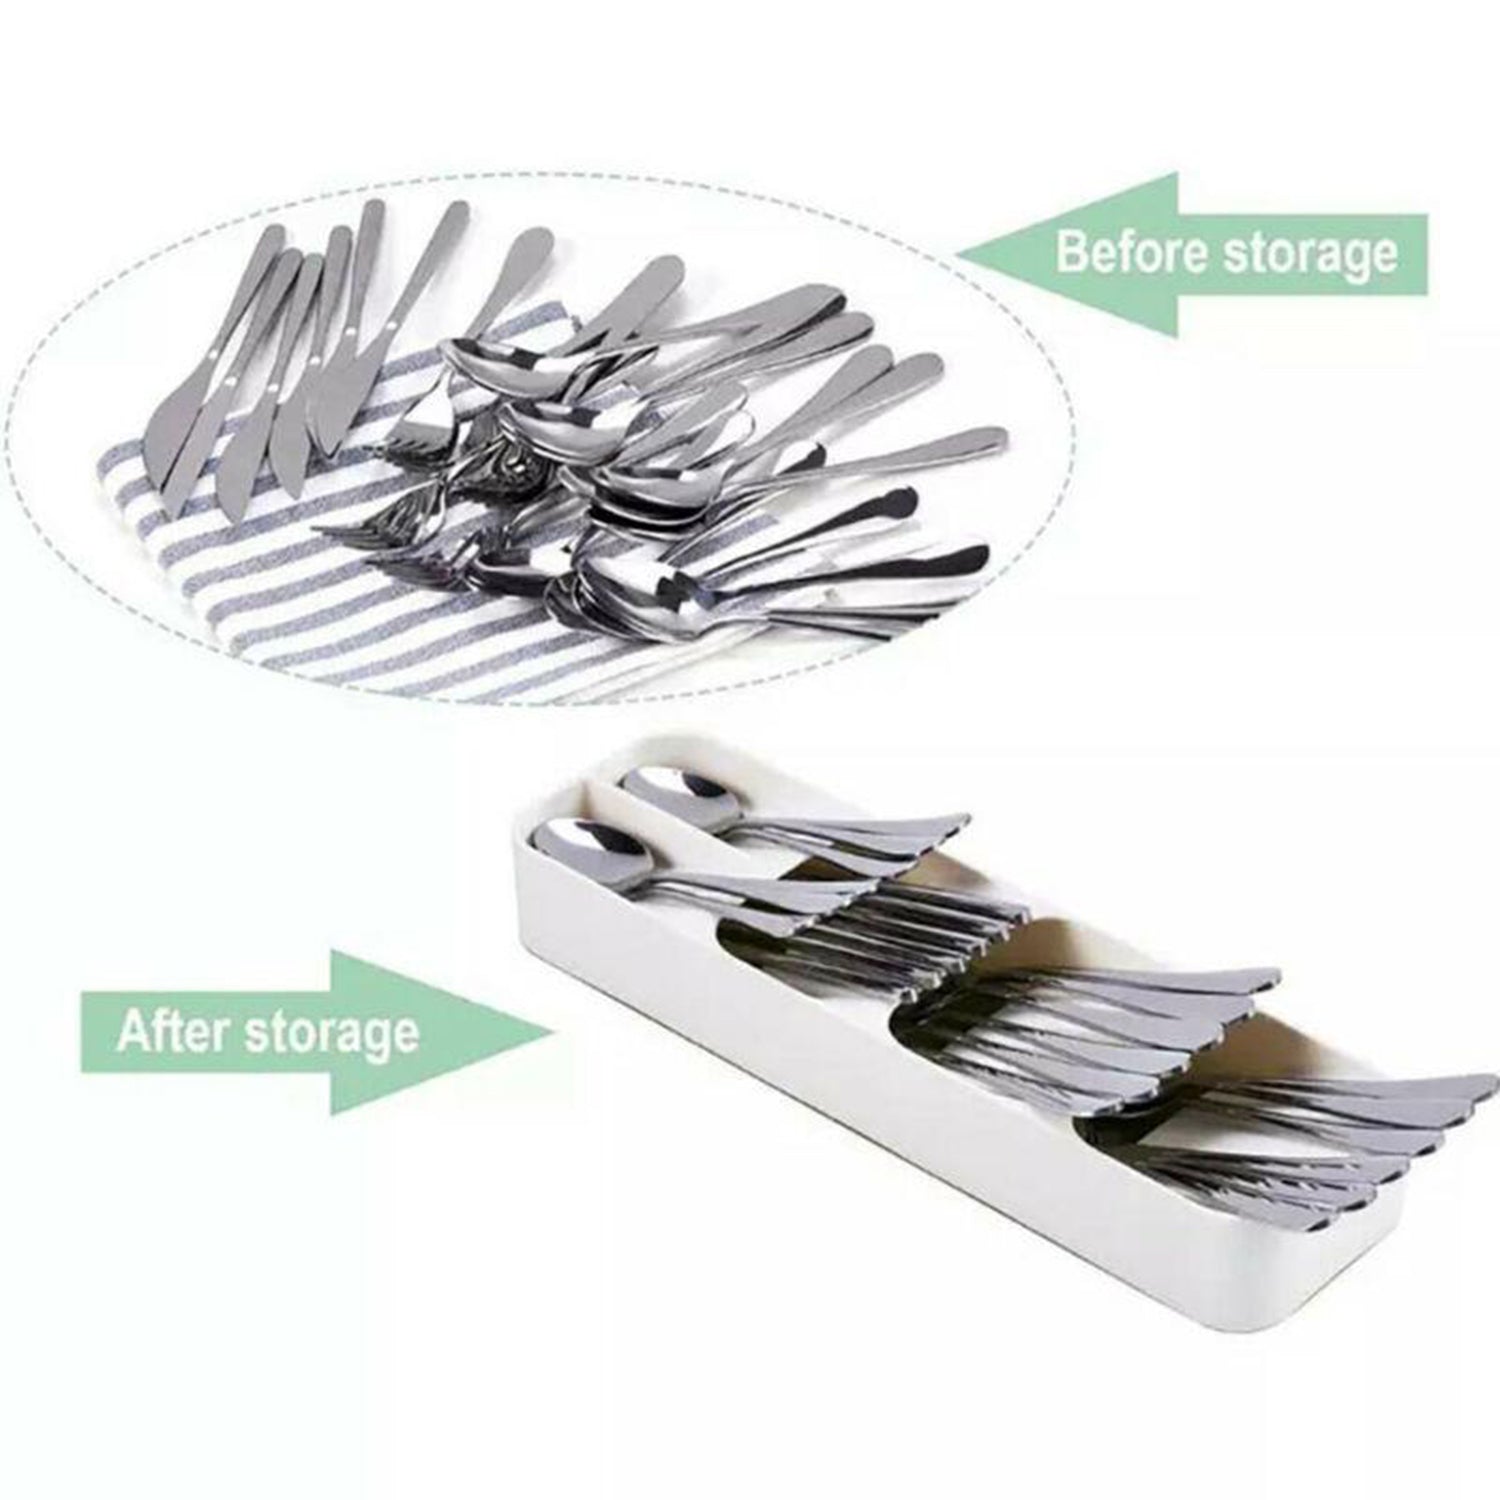 2762 1 Pc Cutlery Tray Box Used For Storing Cutlery Items And Stuffs Easily And Safely.